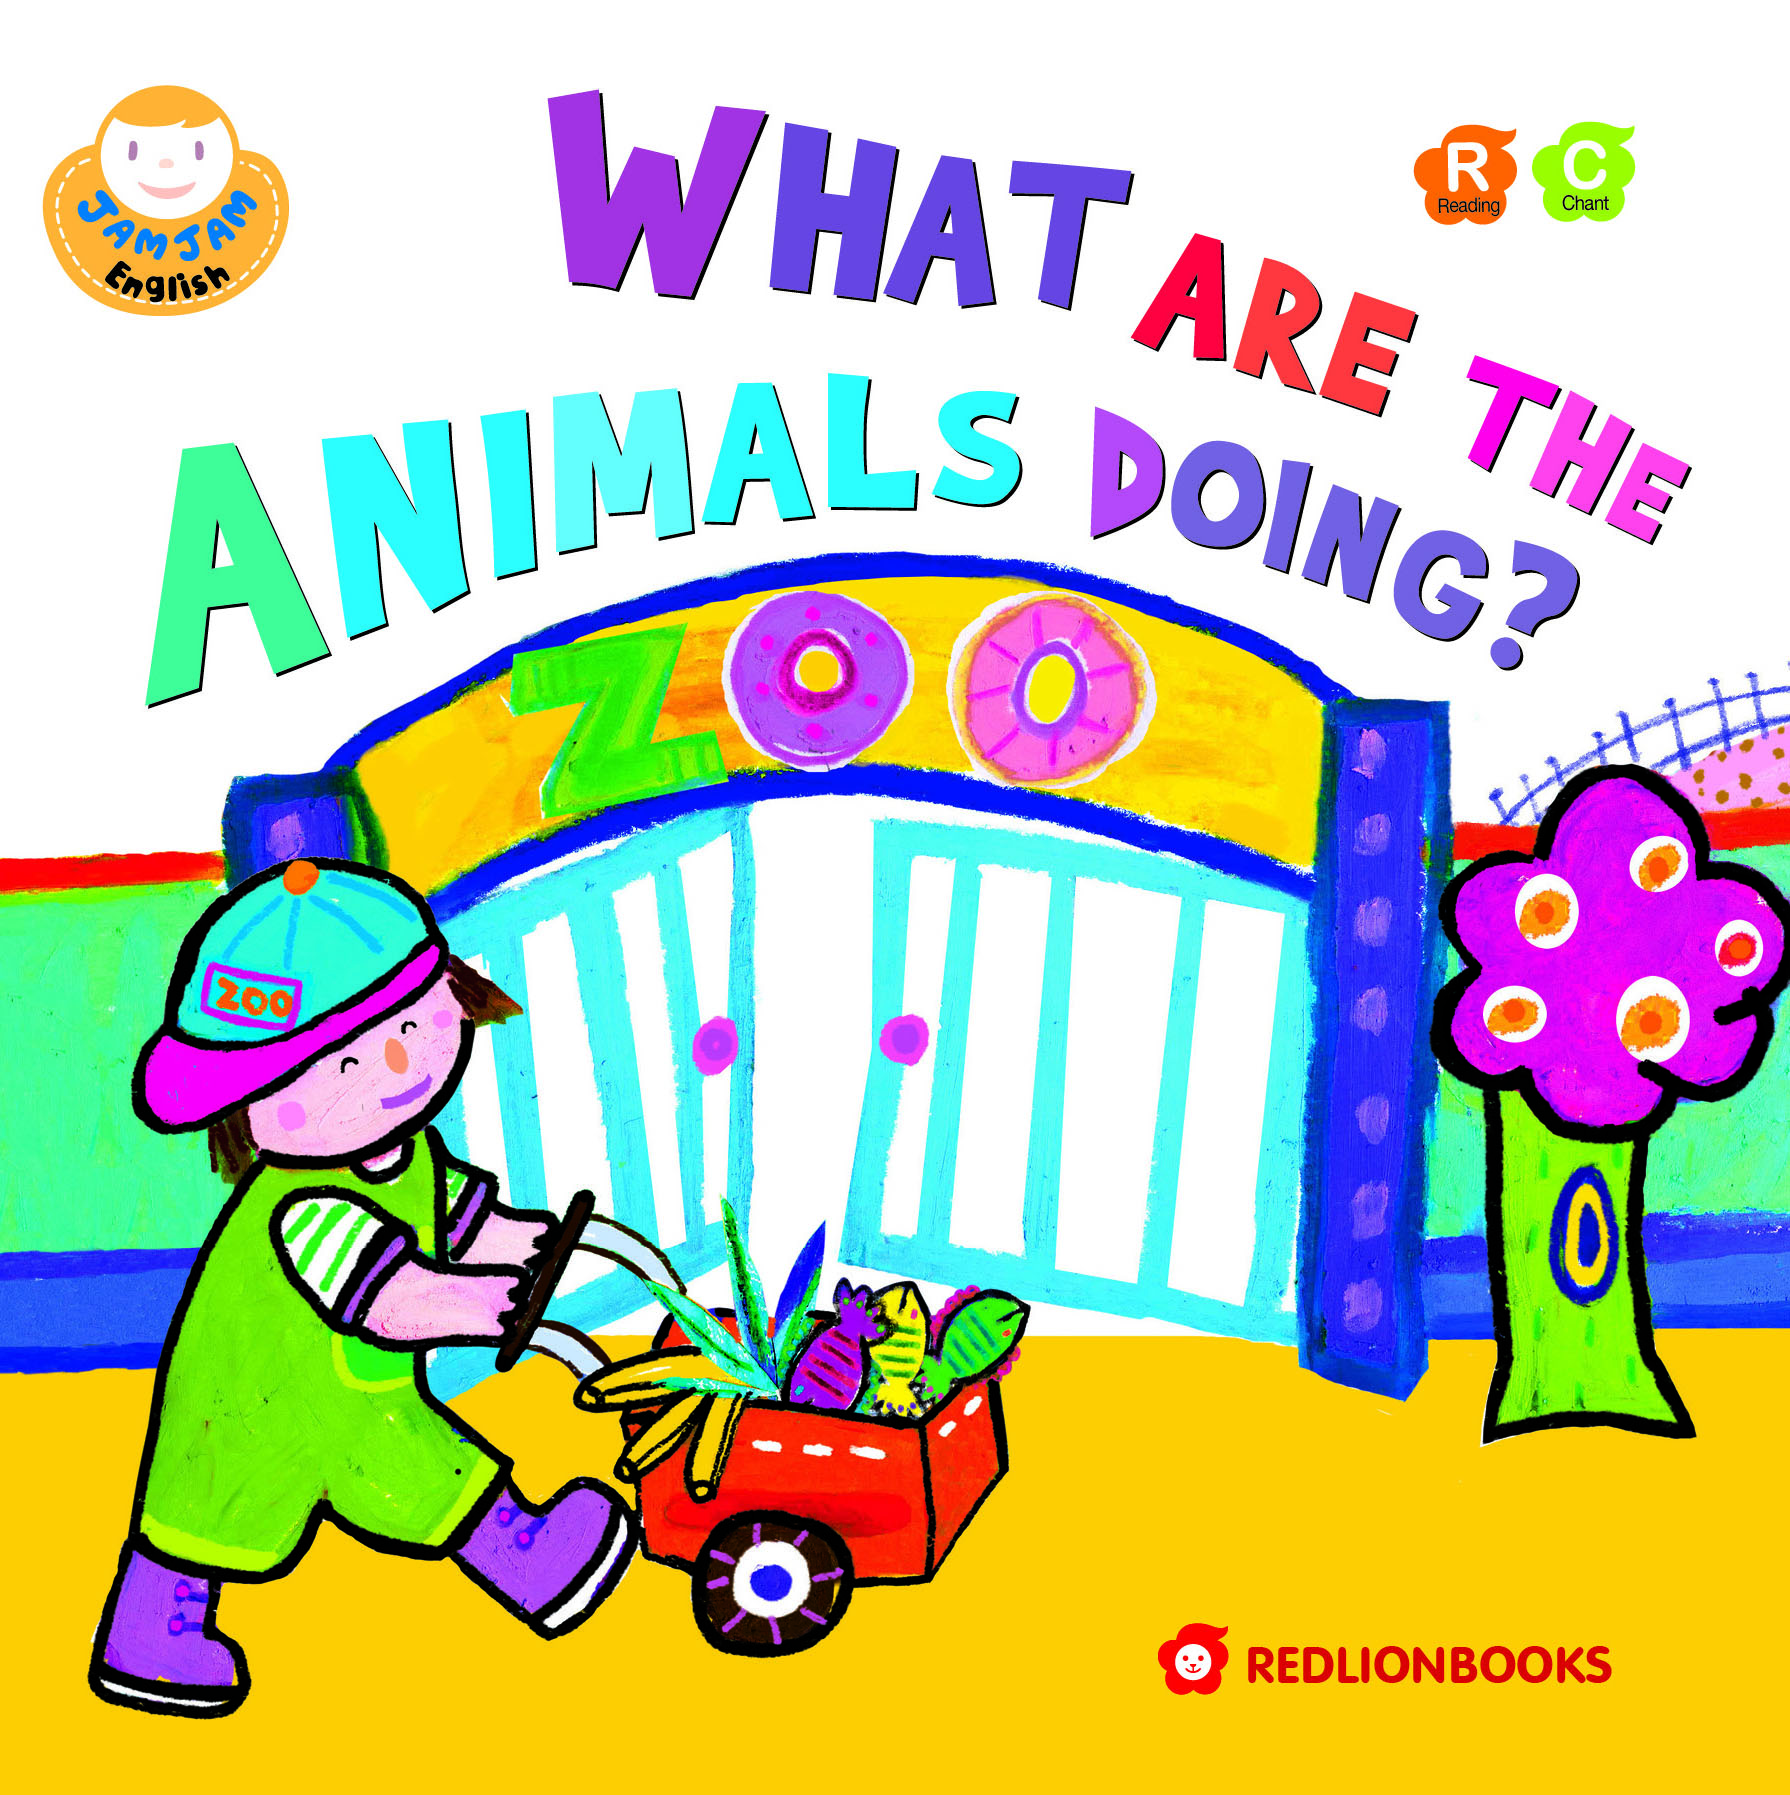 JAMJAM English WHAT ARE THE ANIMALS DOING?